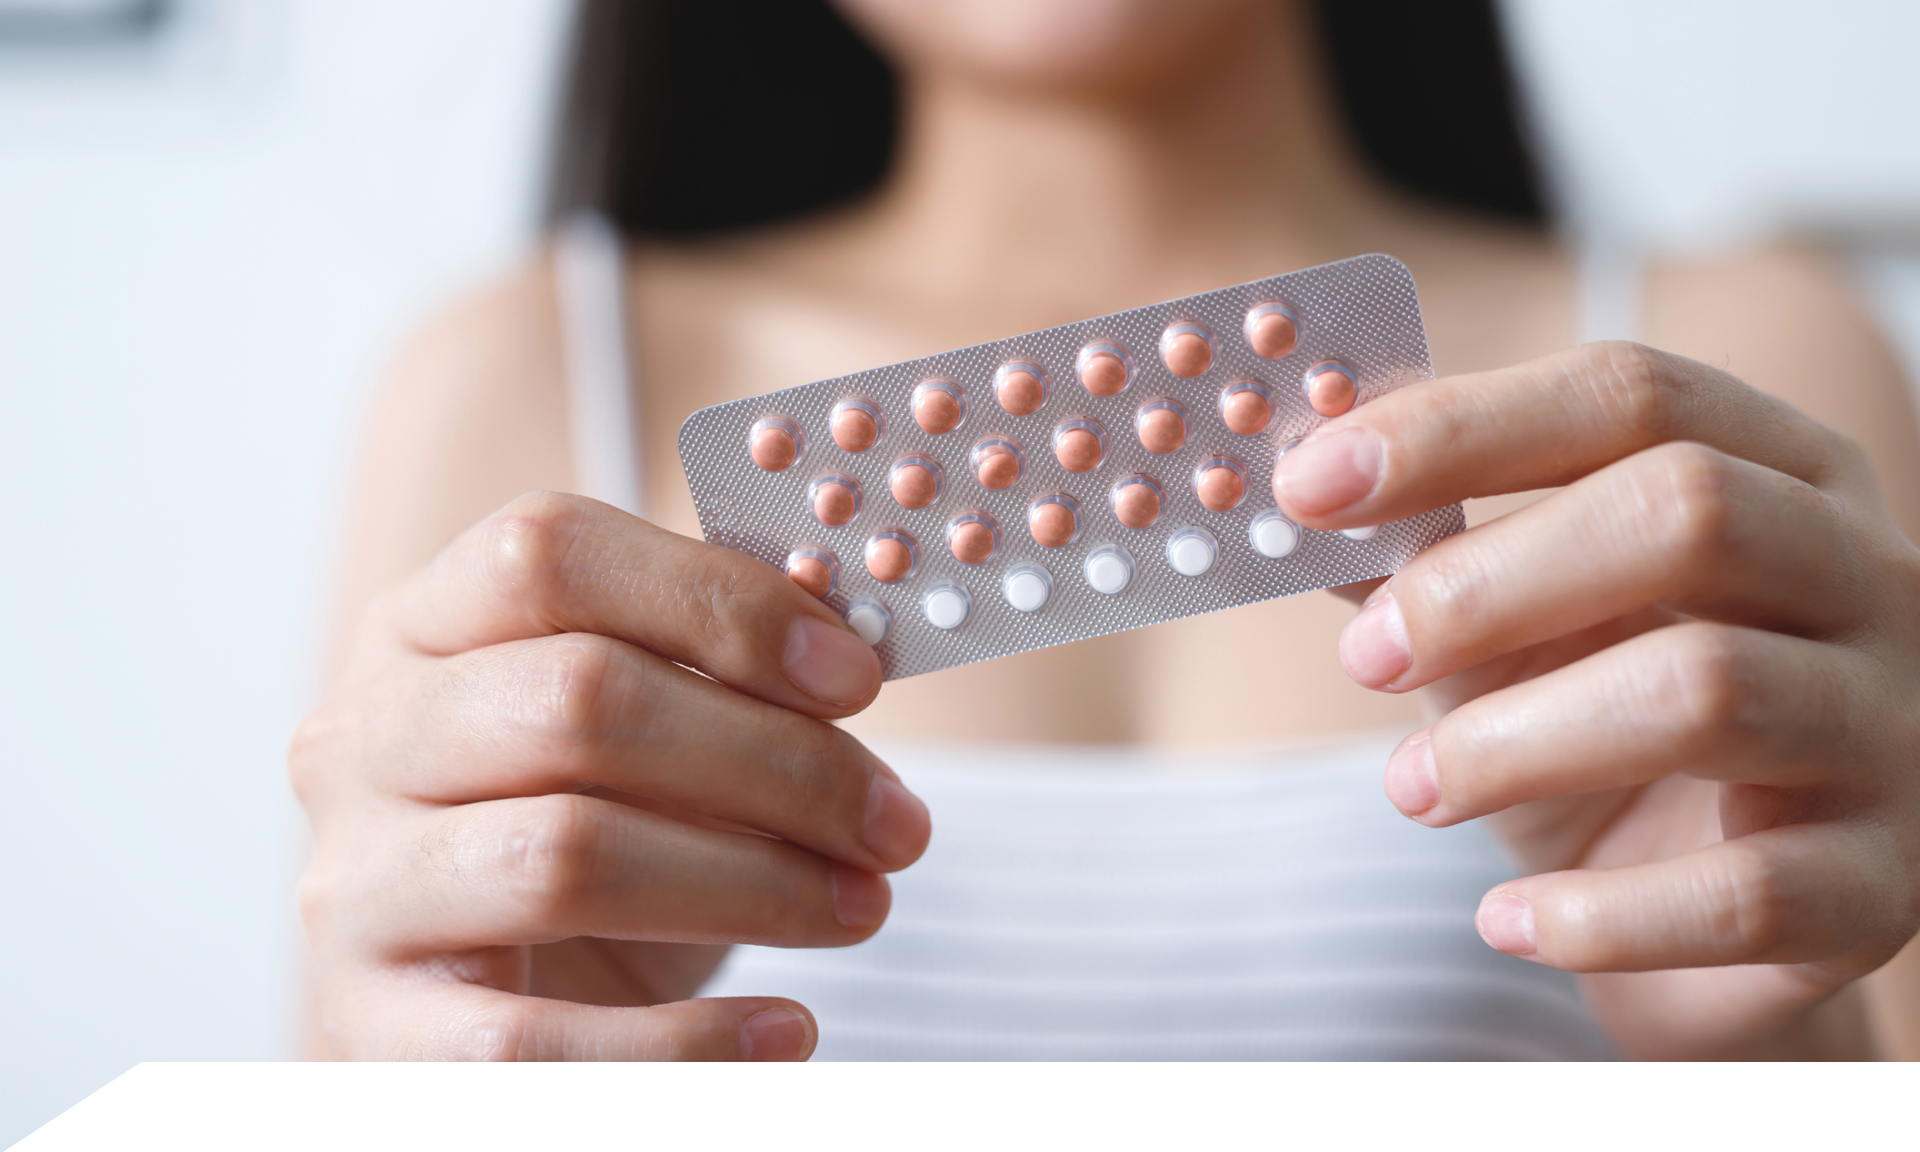 A woman holding up a birth control pill packet